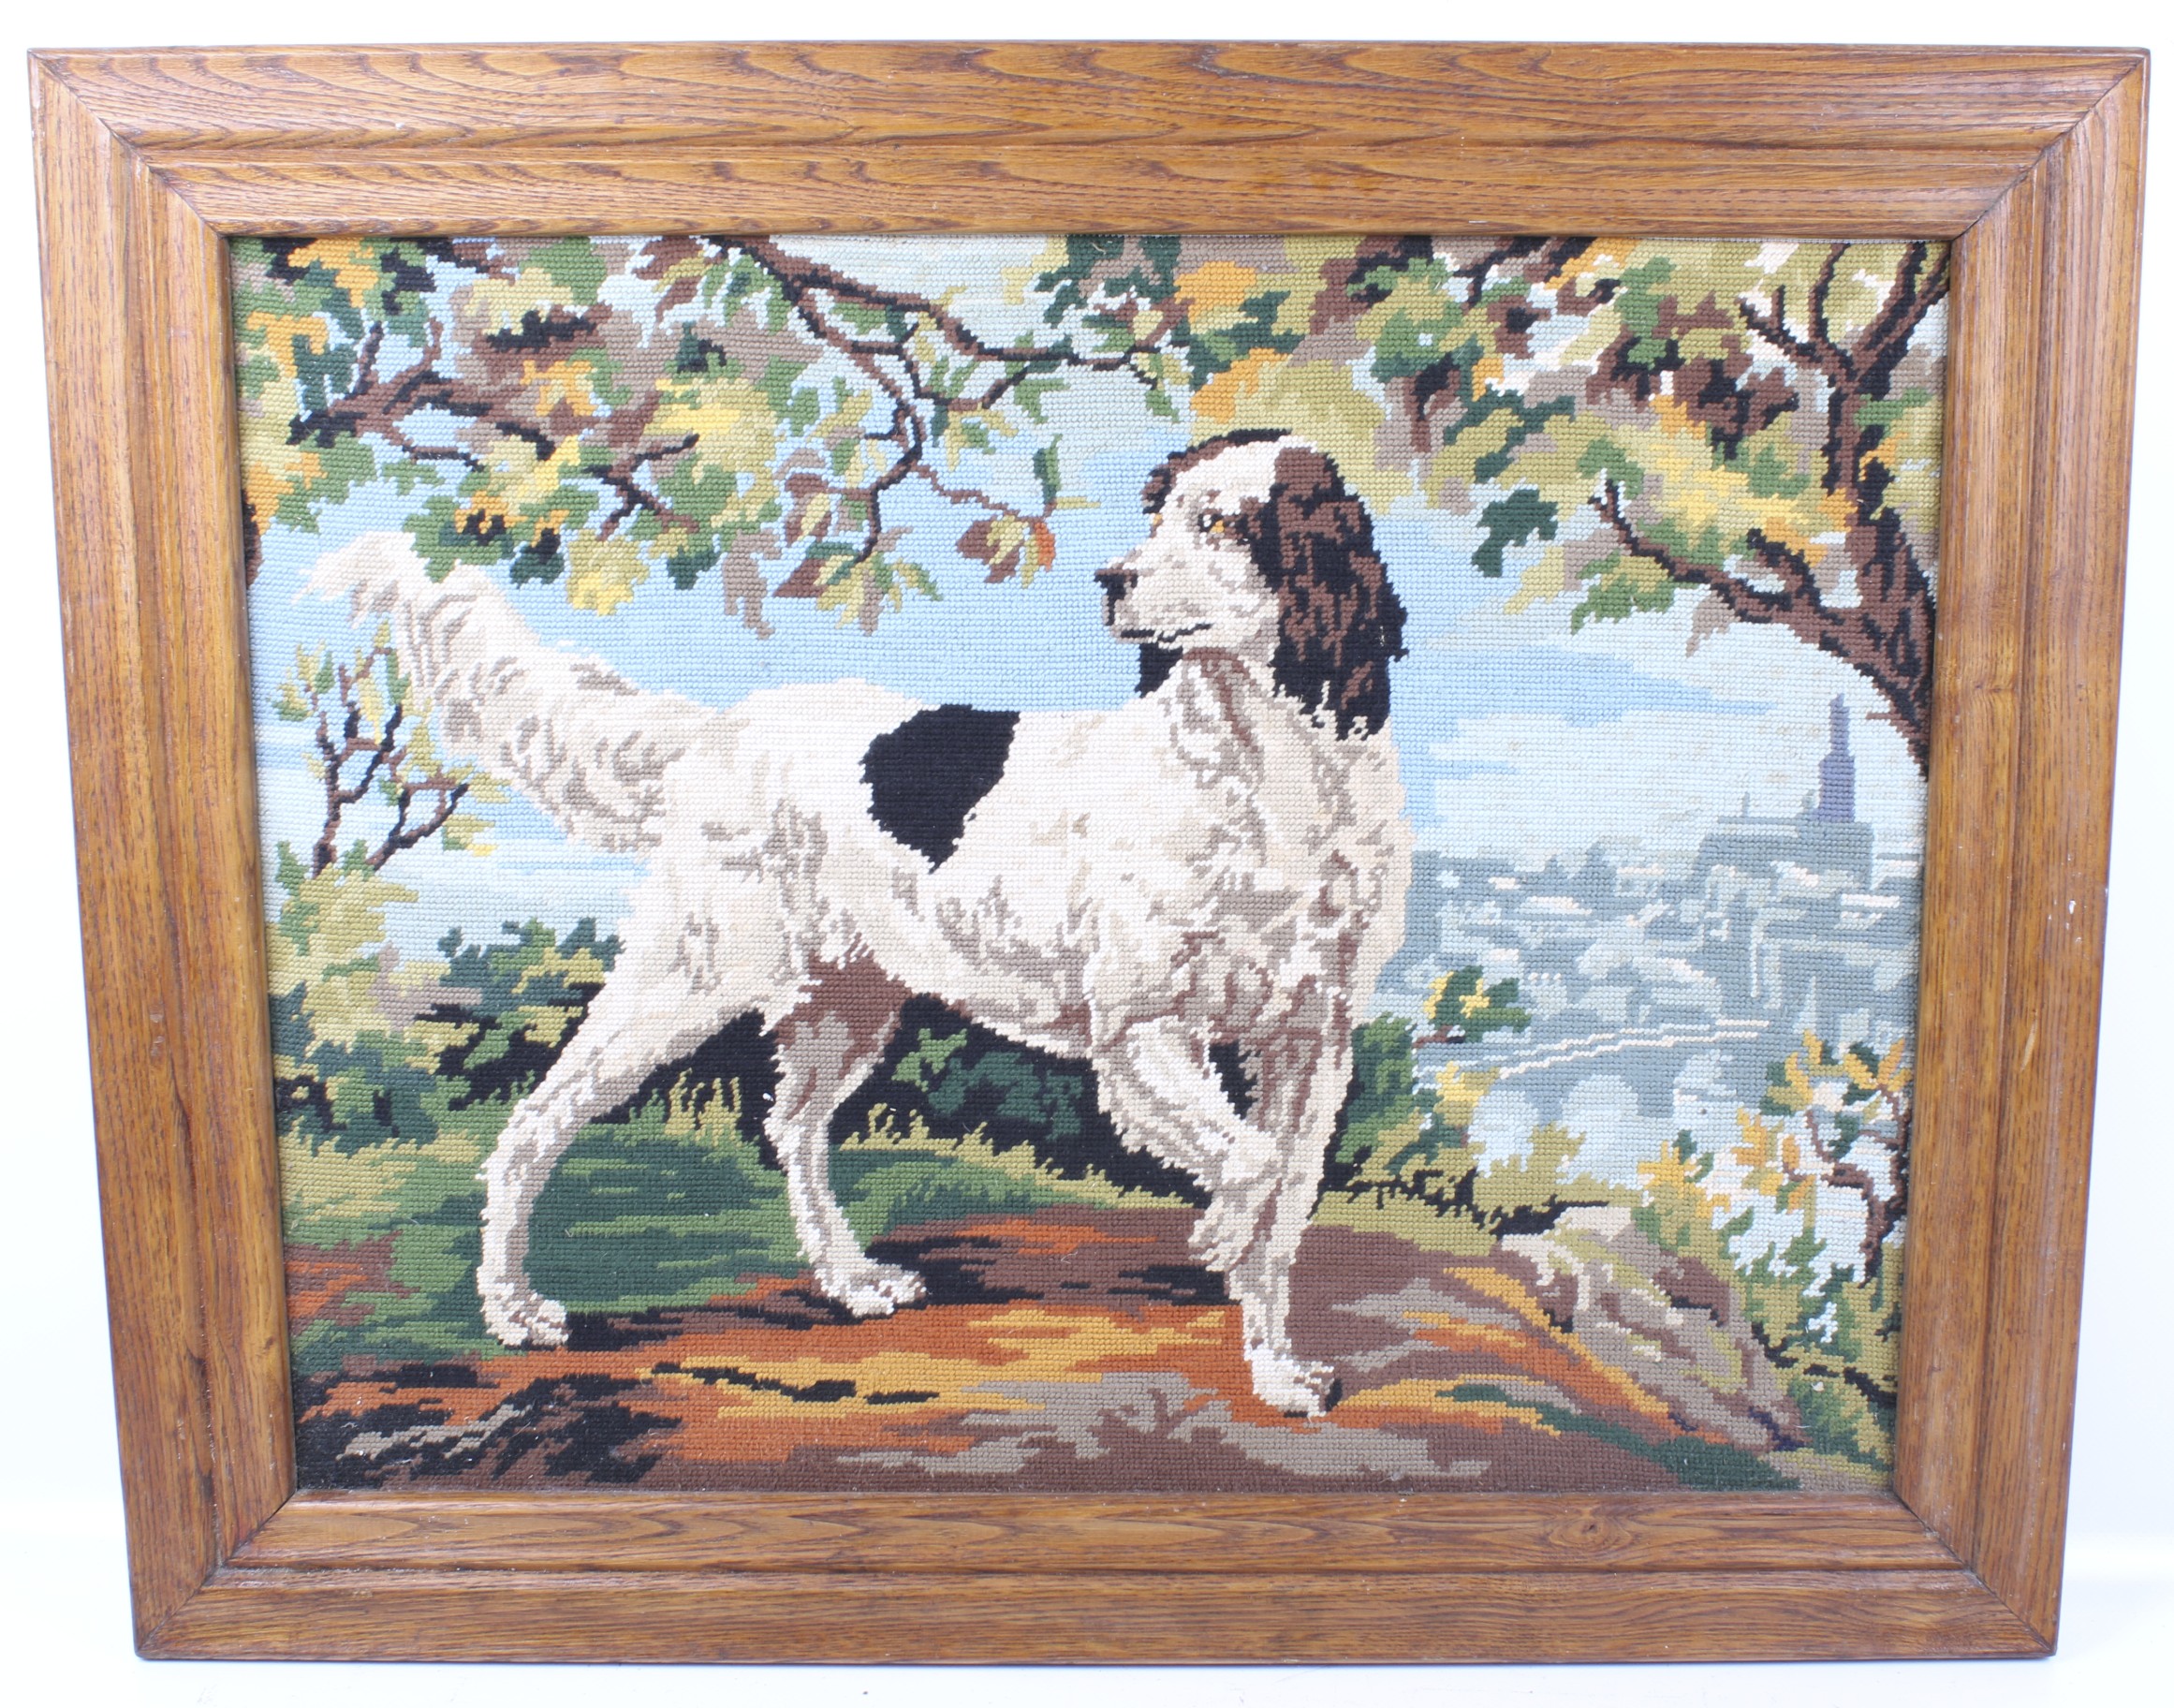 A framed needlepoint panel depicting a hunting dog.